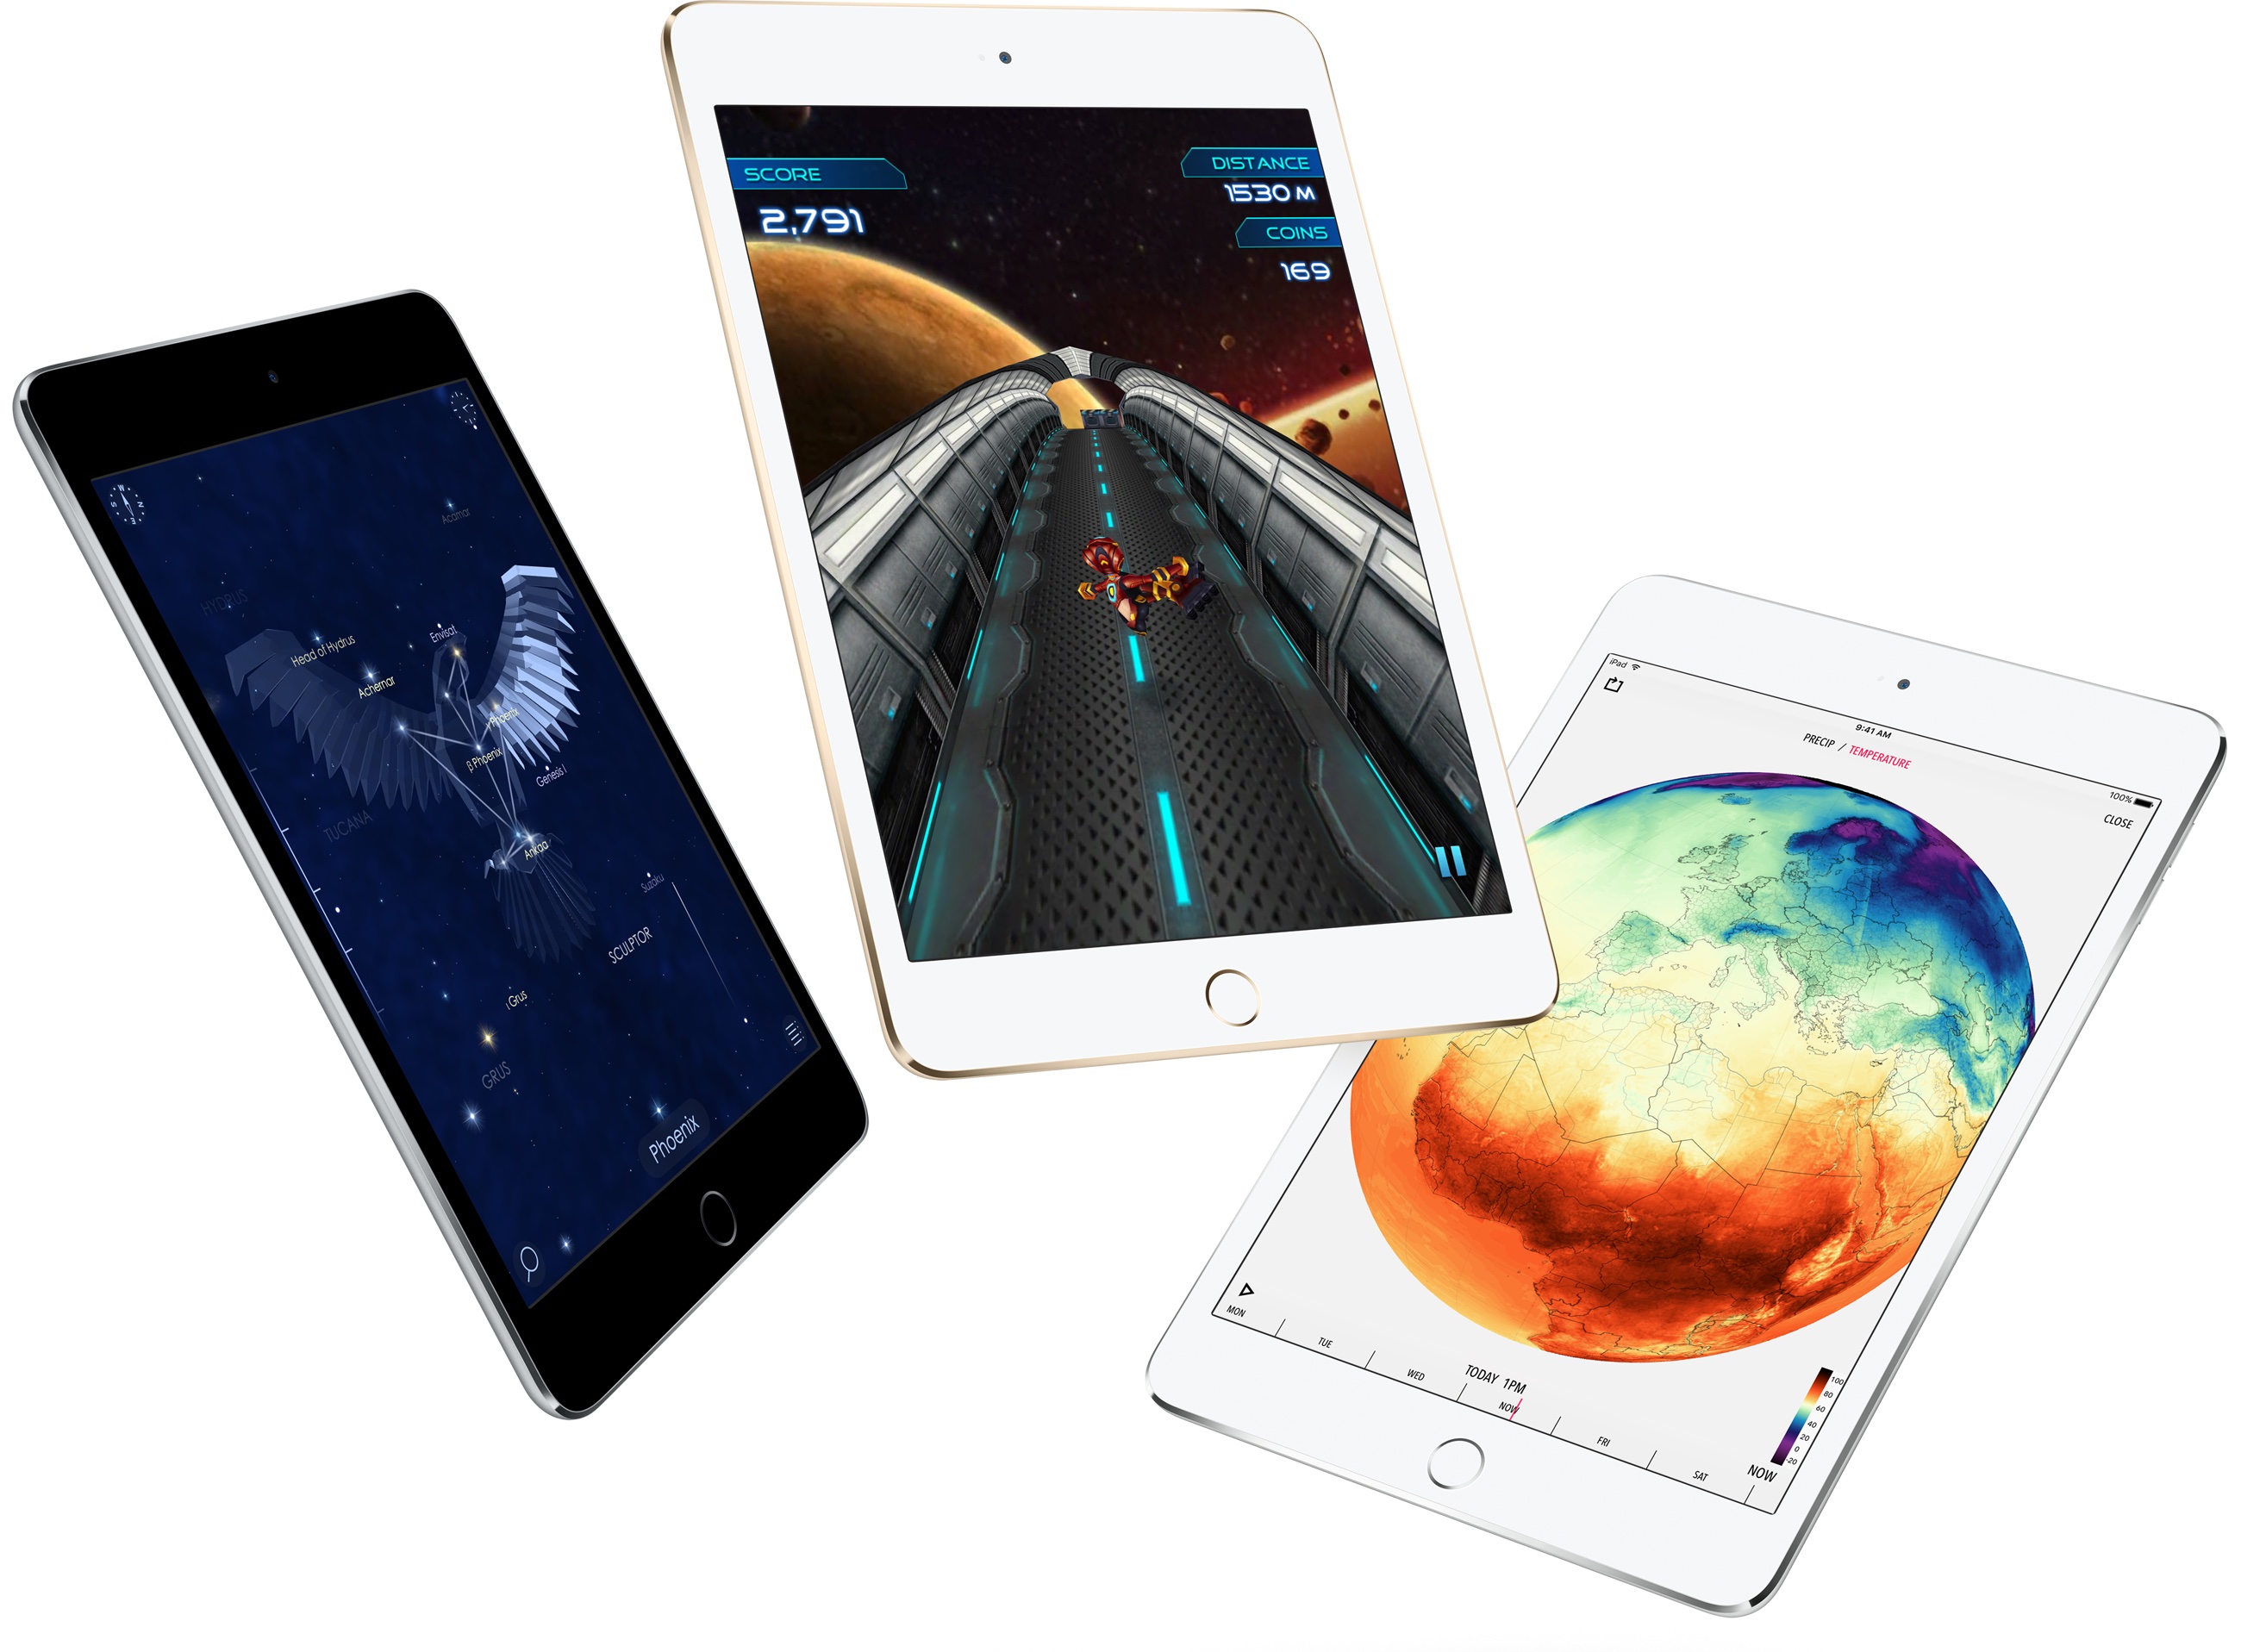 10 things to know about iPad mini 4